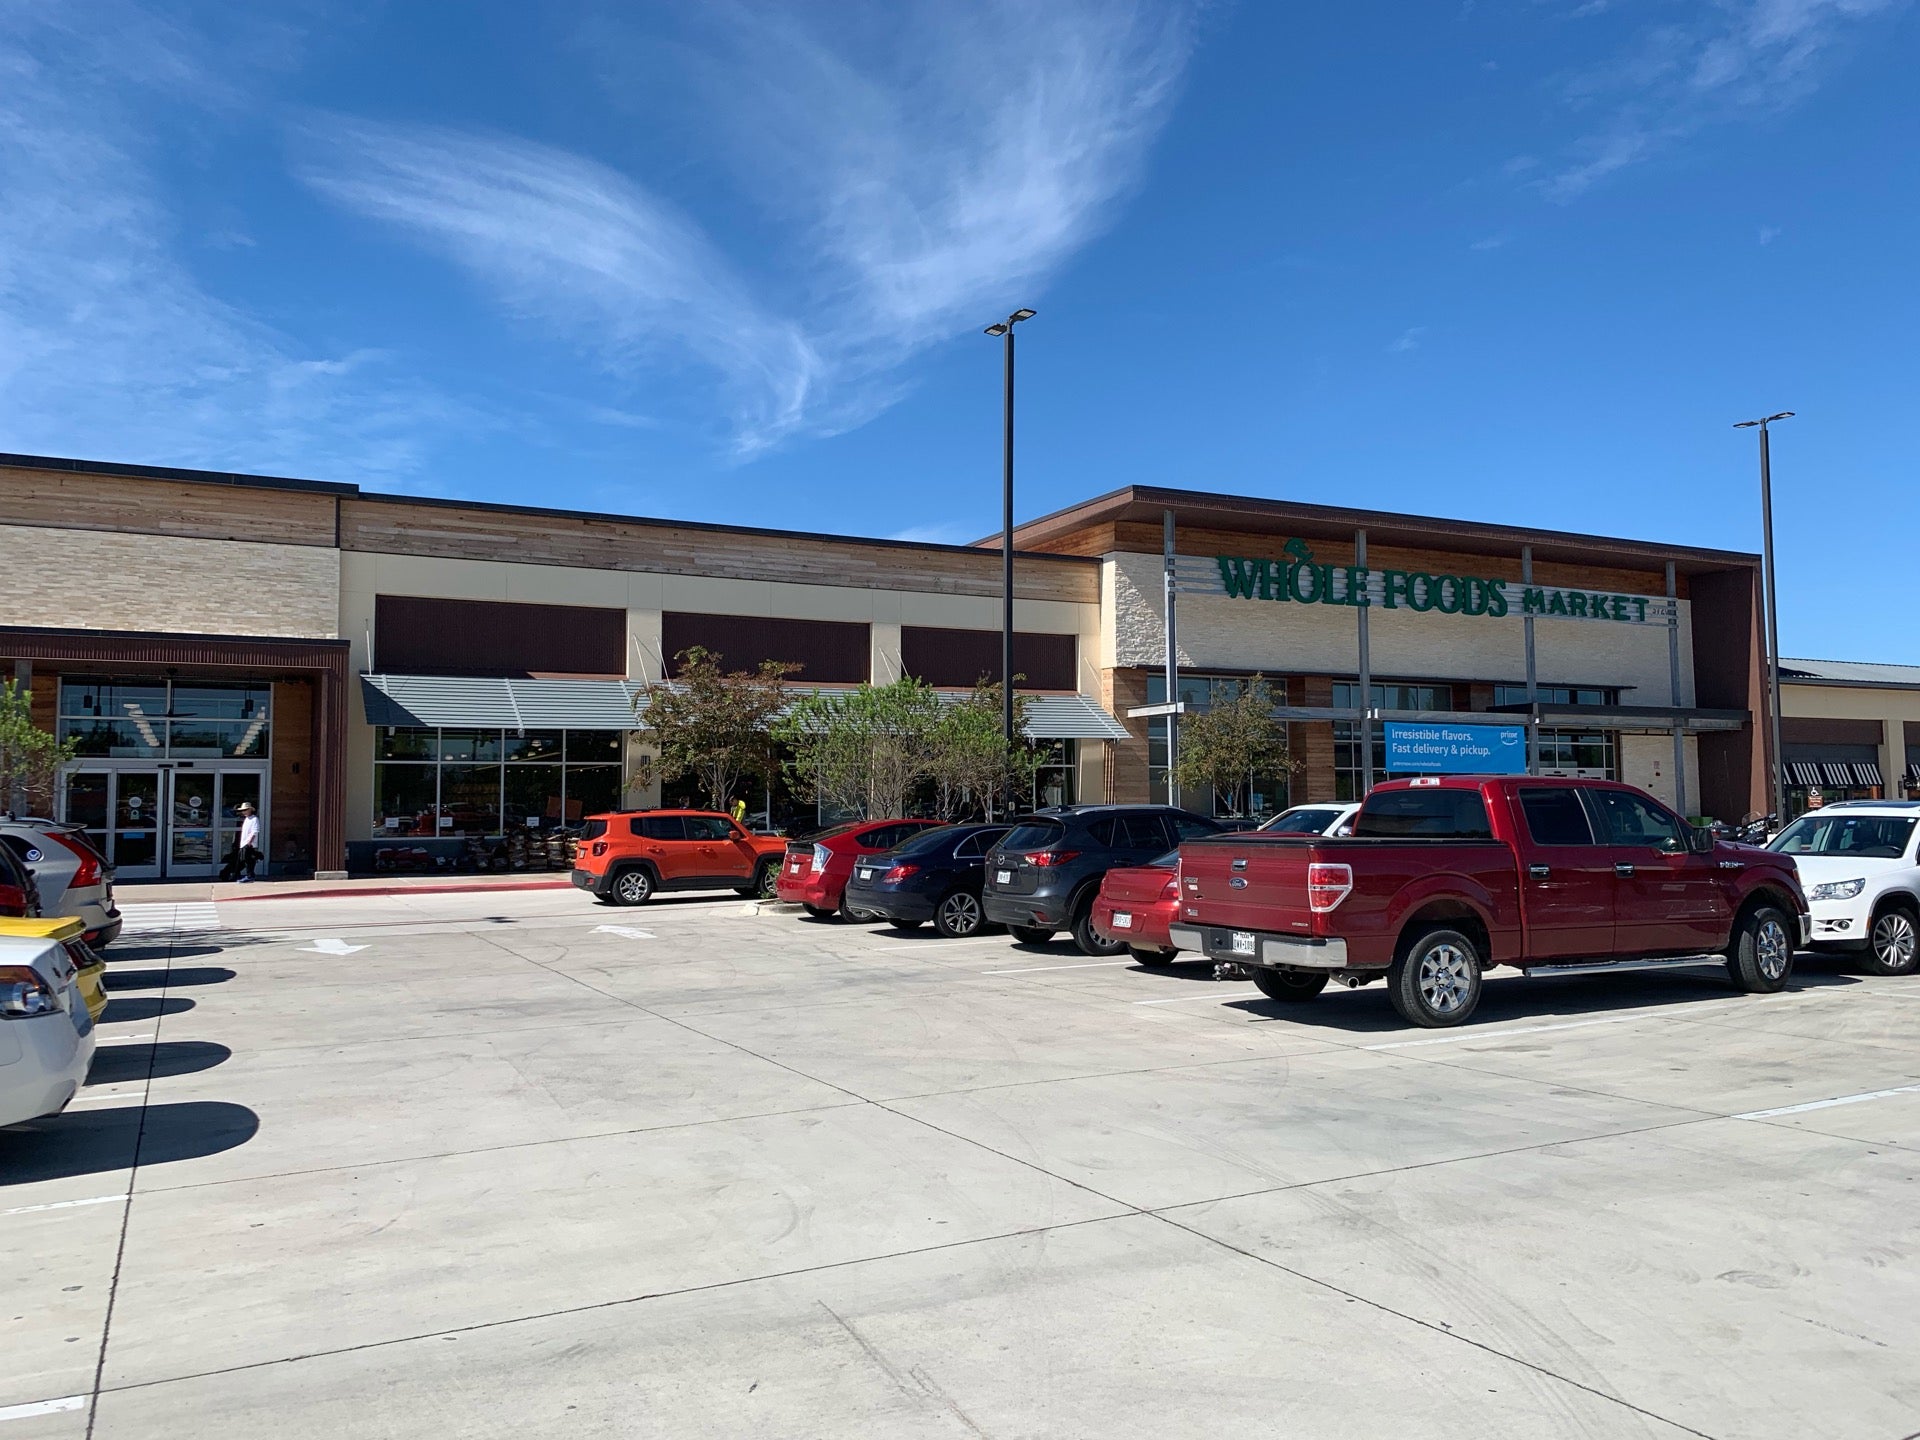 Lots of Chicken bits at Whole foods Market. - Picture of Whole Foods Market,  Austin - Tripadvisor